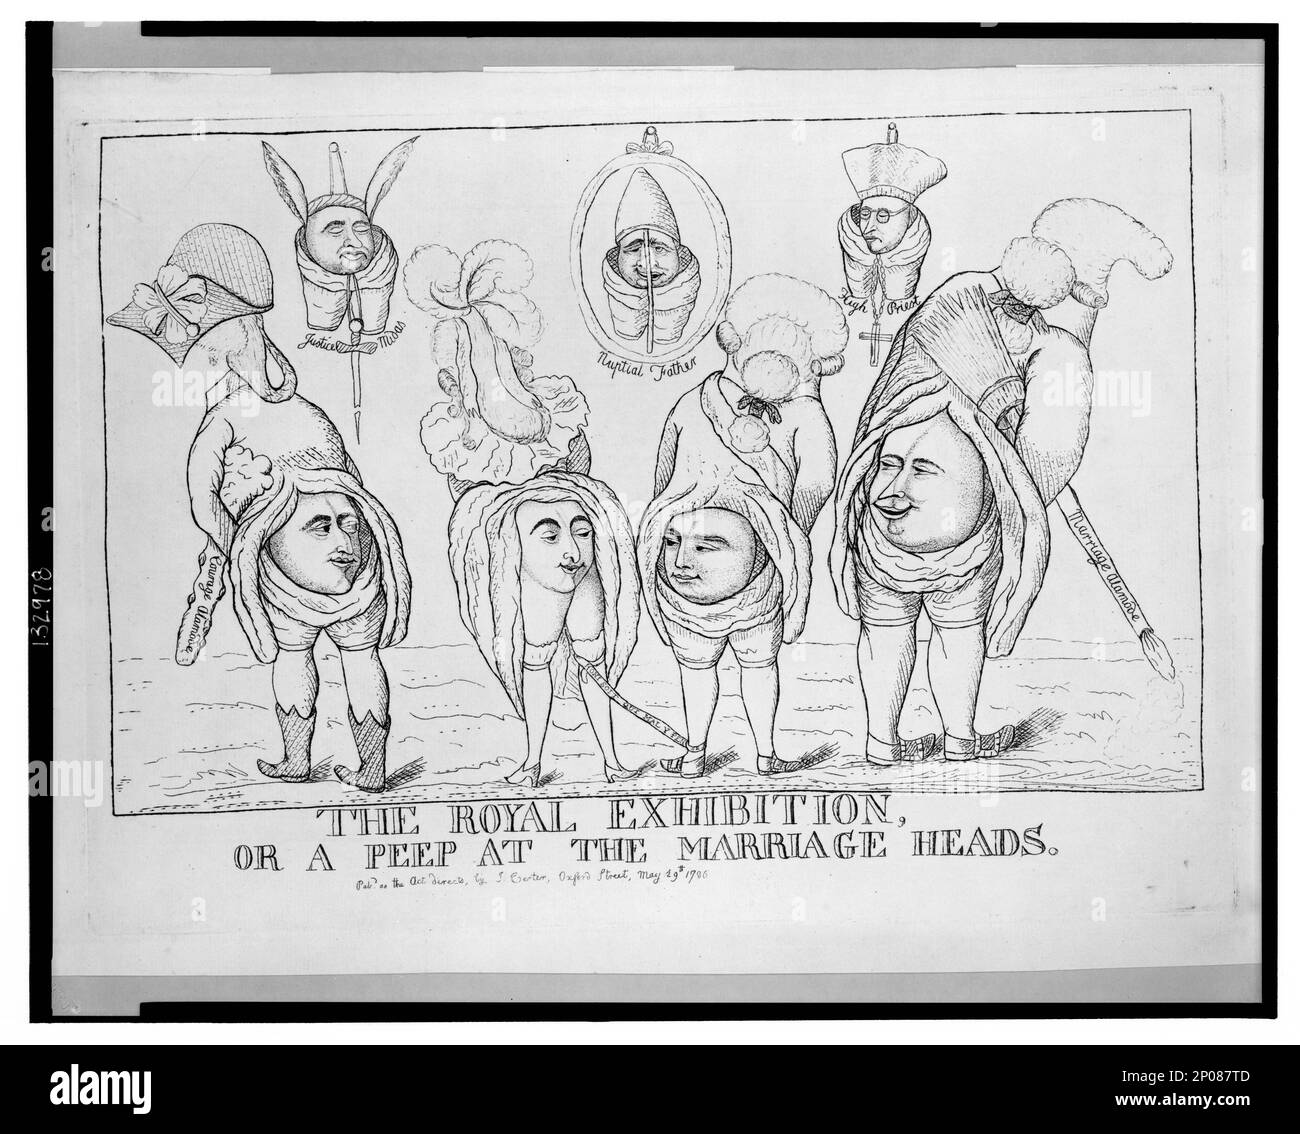 The royal exhibition, or a peep at the marriage heads. British Cartoon Prints Collection . George,IV,King of Great Britain,1762-1830,Marriage. , Fitzherbert, Maria Anne,1756-1837,Marriage. , Burke, Edmund,1729-1797. , Royal weddings,England,1780-1790. , Buttocks,1780-1790. , Faces,1780-1790. Stock Photo